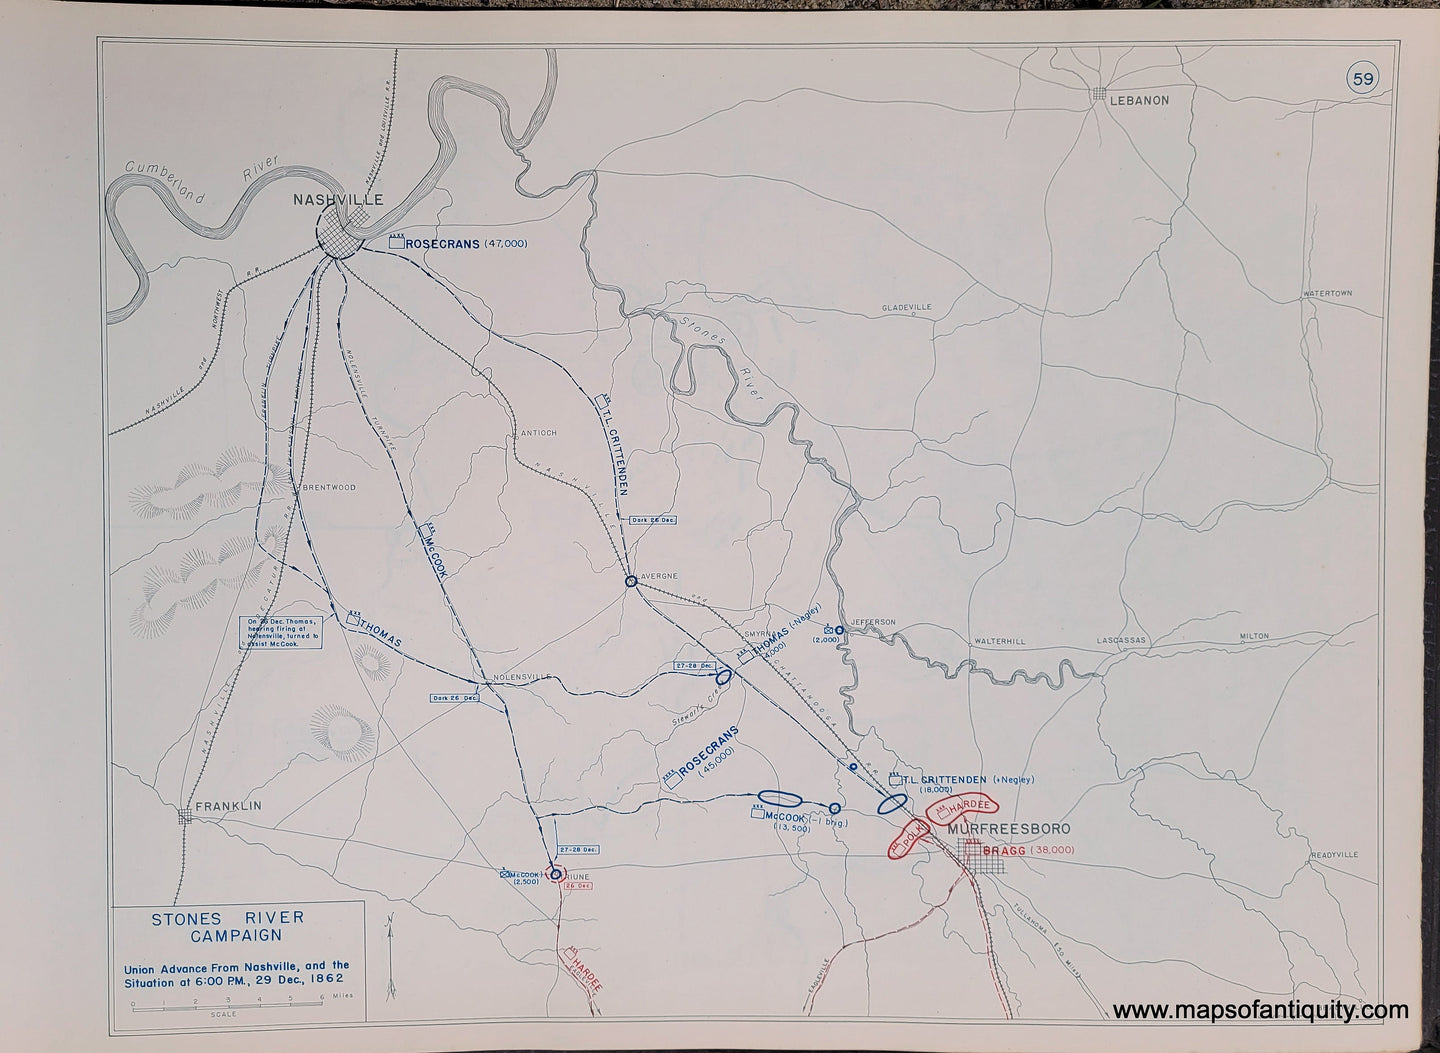 Genuine-Antique-Map-Stones-River-Campaign-Union-Advance-From-Nashville-and-the-Situation-at-6-00-PM-29-Dec--1862-1948-Matthew-Forney-Steele-Dept-of-Military-Art-and-Engineering-US-Military-Academy-West-Point-Maps-Of-Antiquity